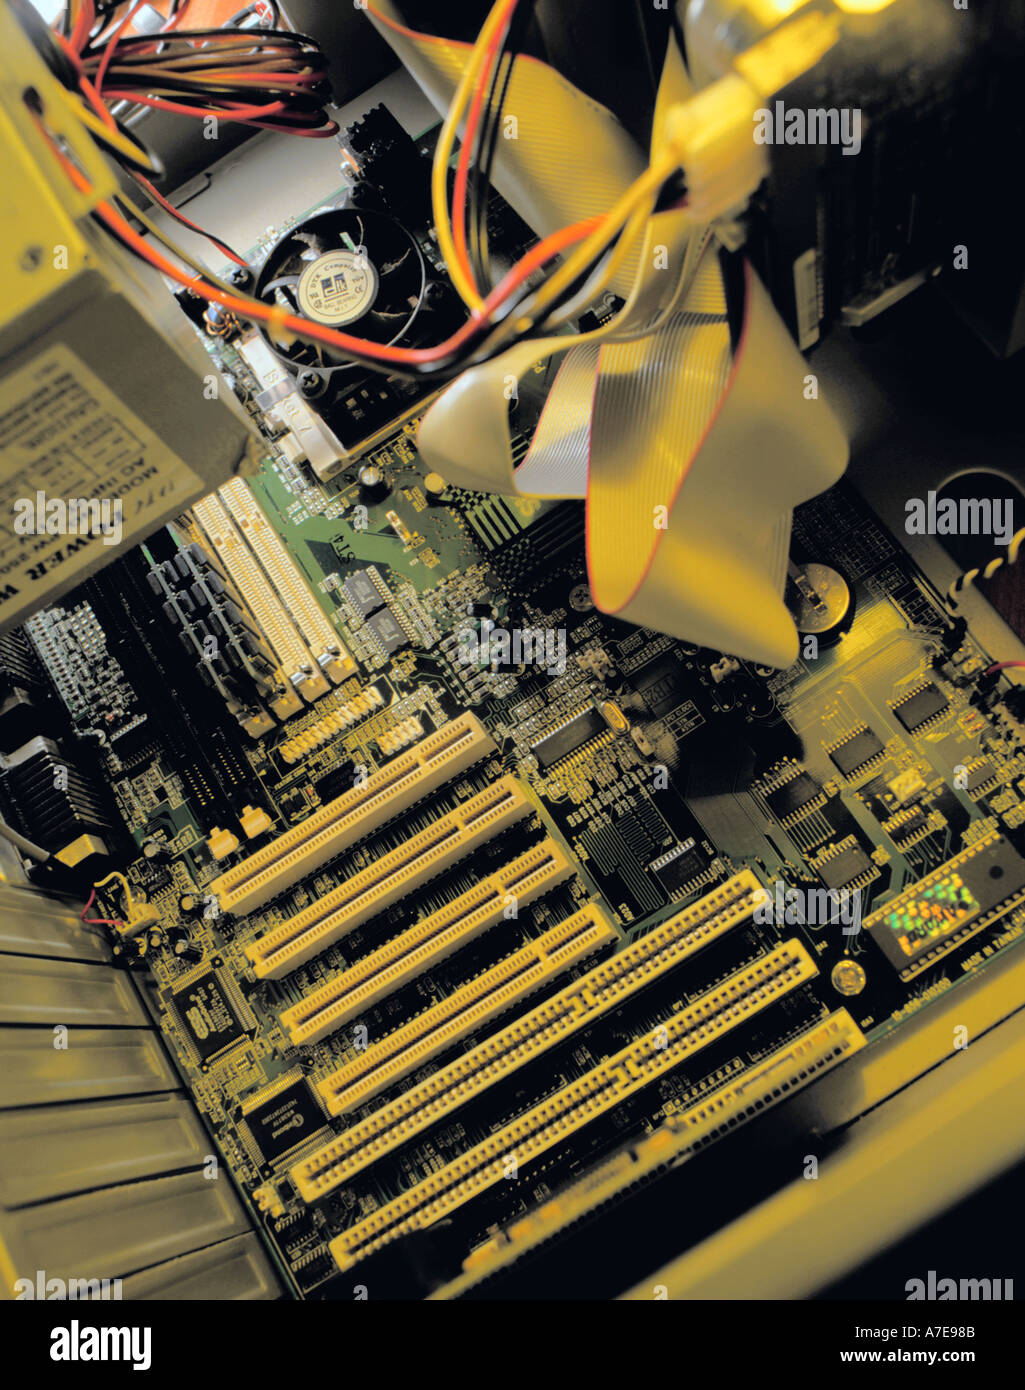 Inside a personal computer, showing mother board with SCSI connections for outlet ports at the base of the picture. Stock Photo